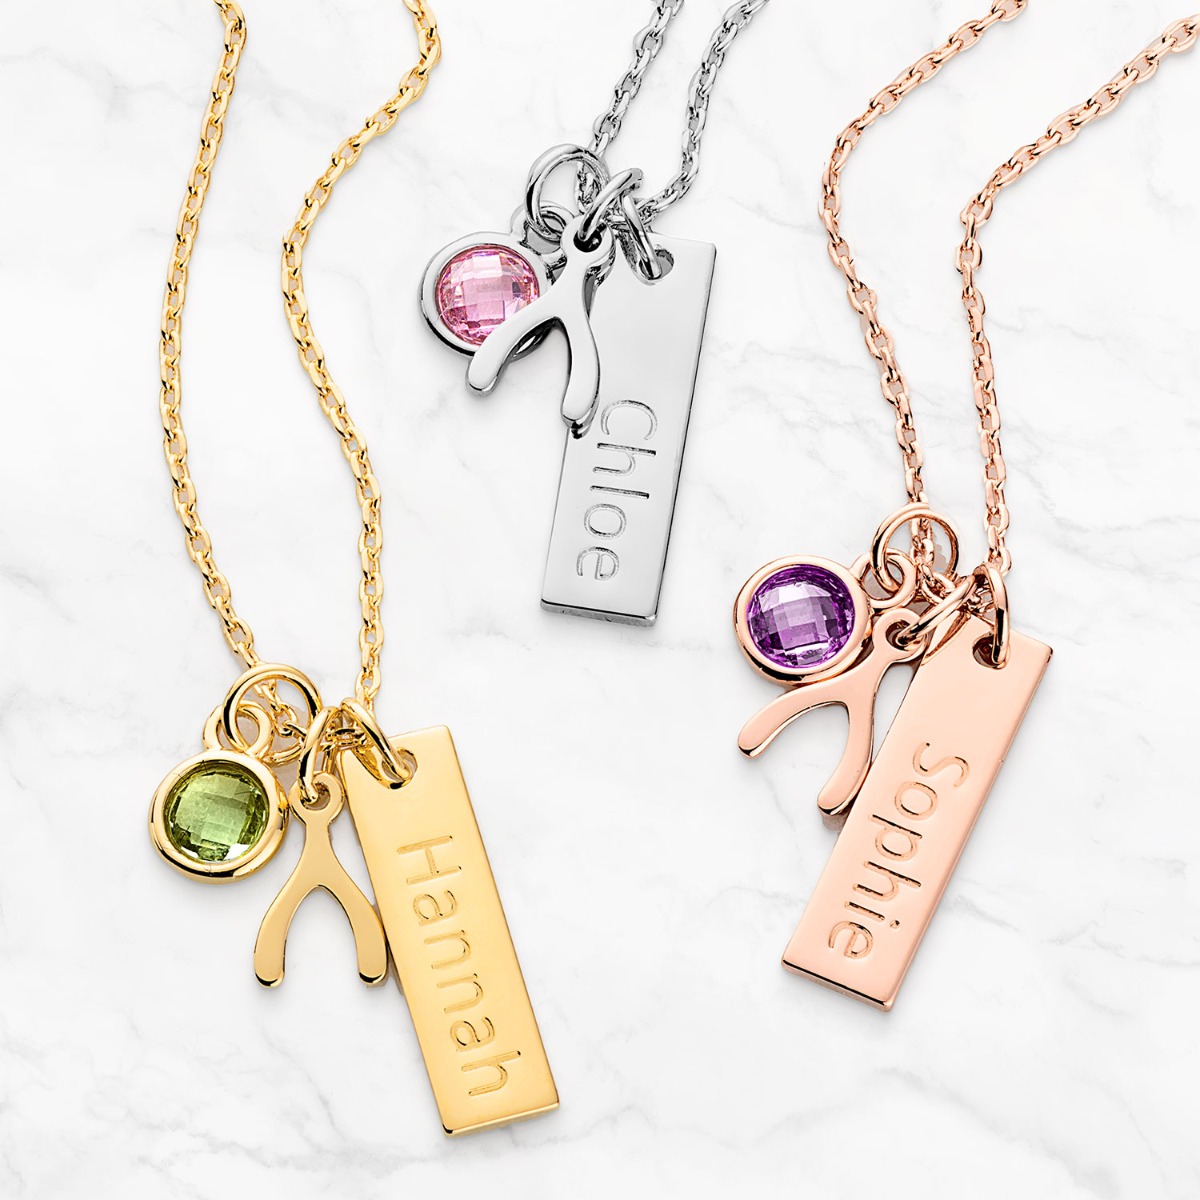 Make A Wish Personalized Charm Necklace